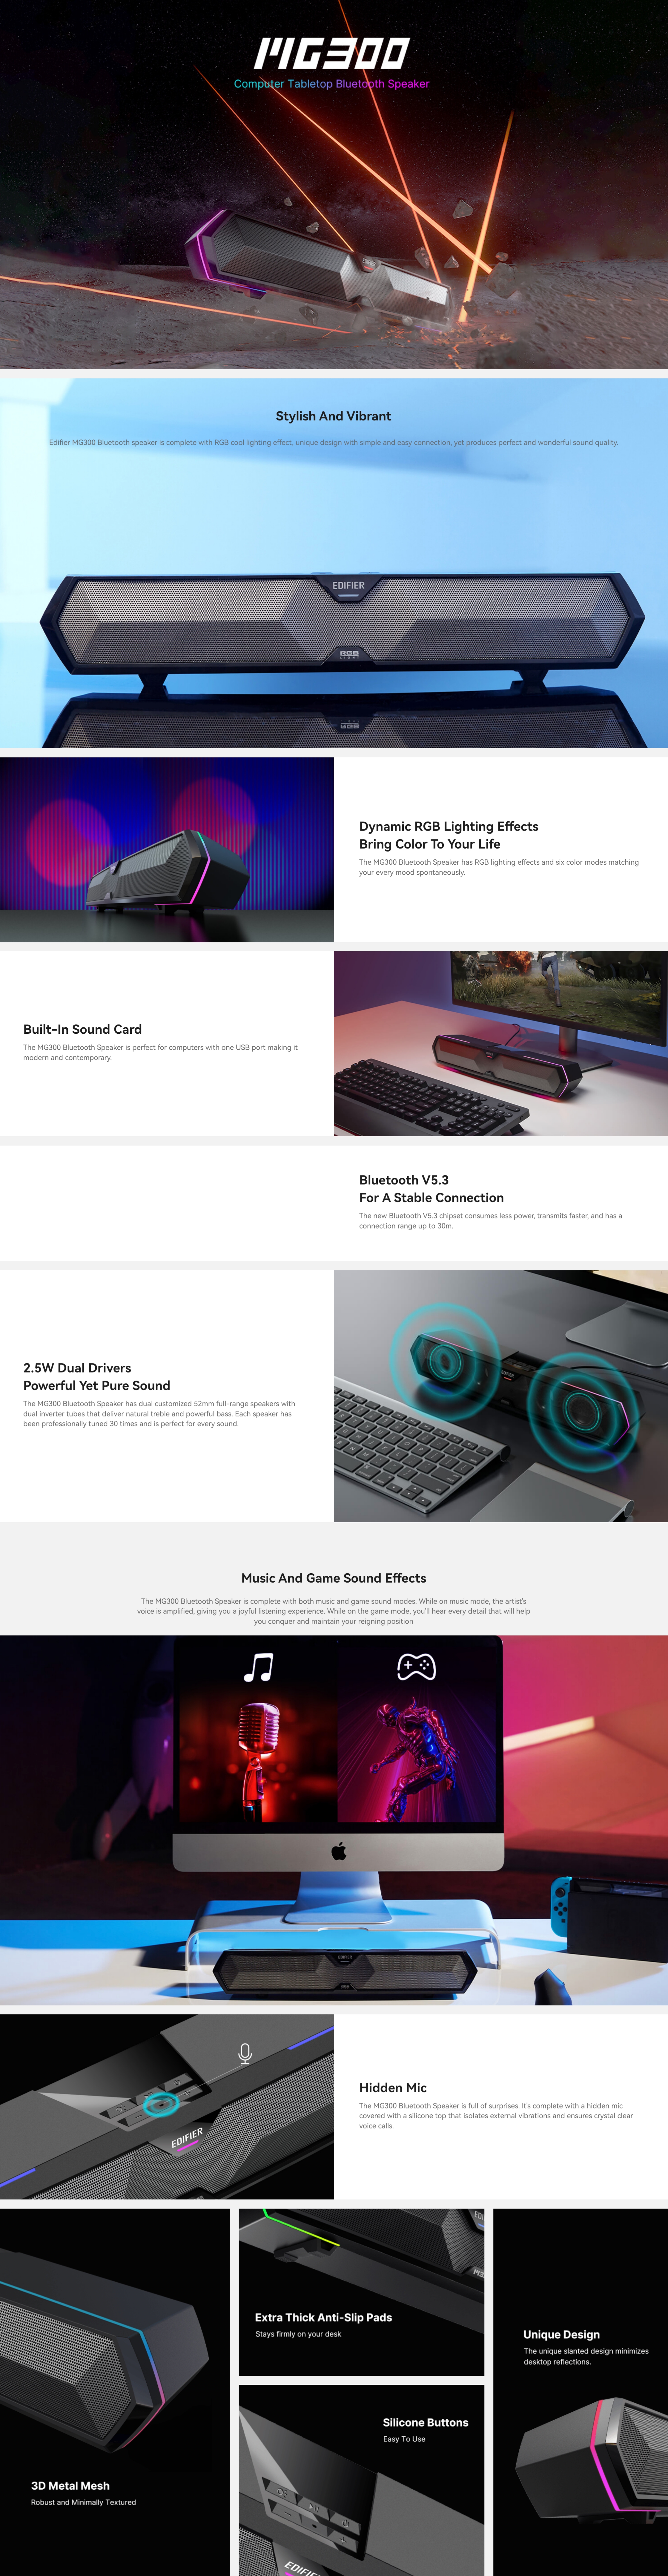 A large marketing image providing additional information about the product Edifier MG300 - Bluetooth RGB Desktop Speaker - Additional alt info not provided